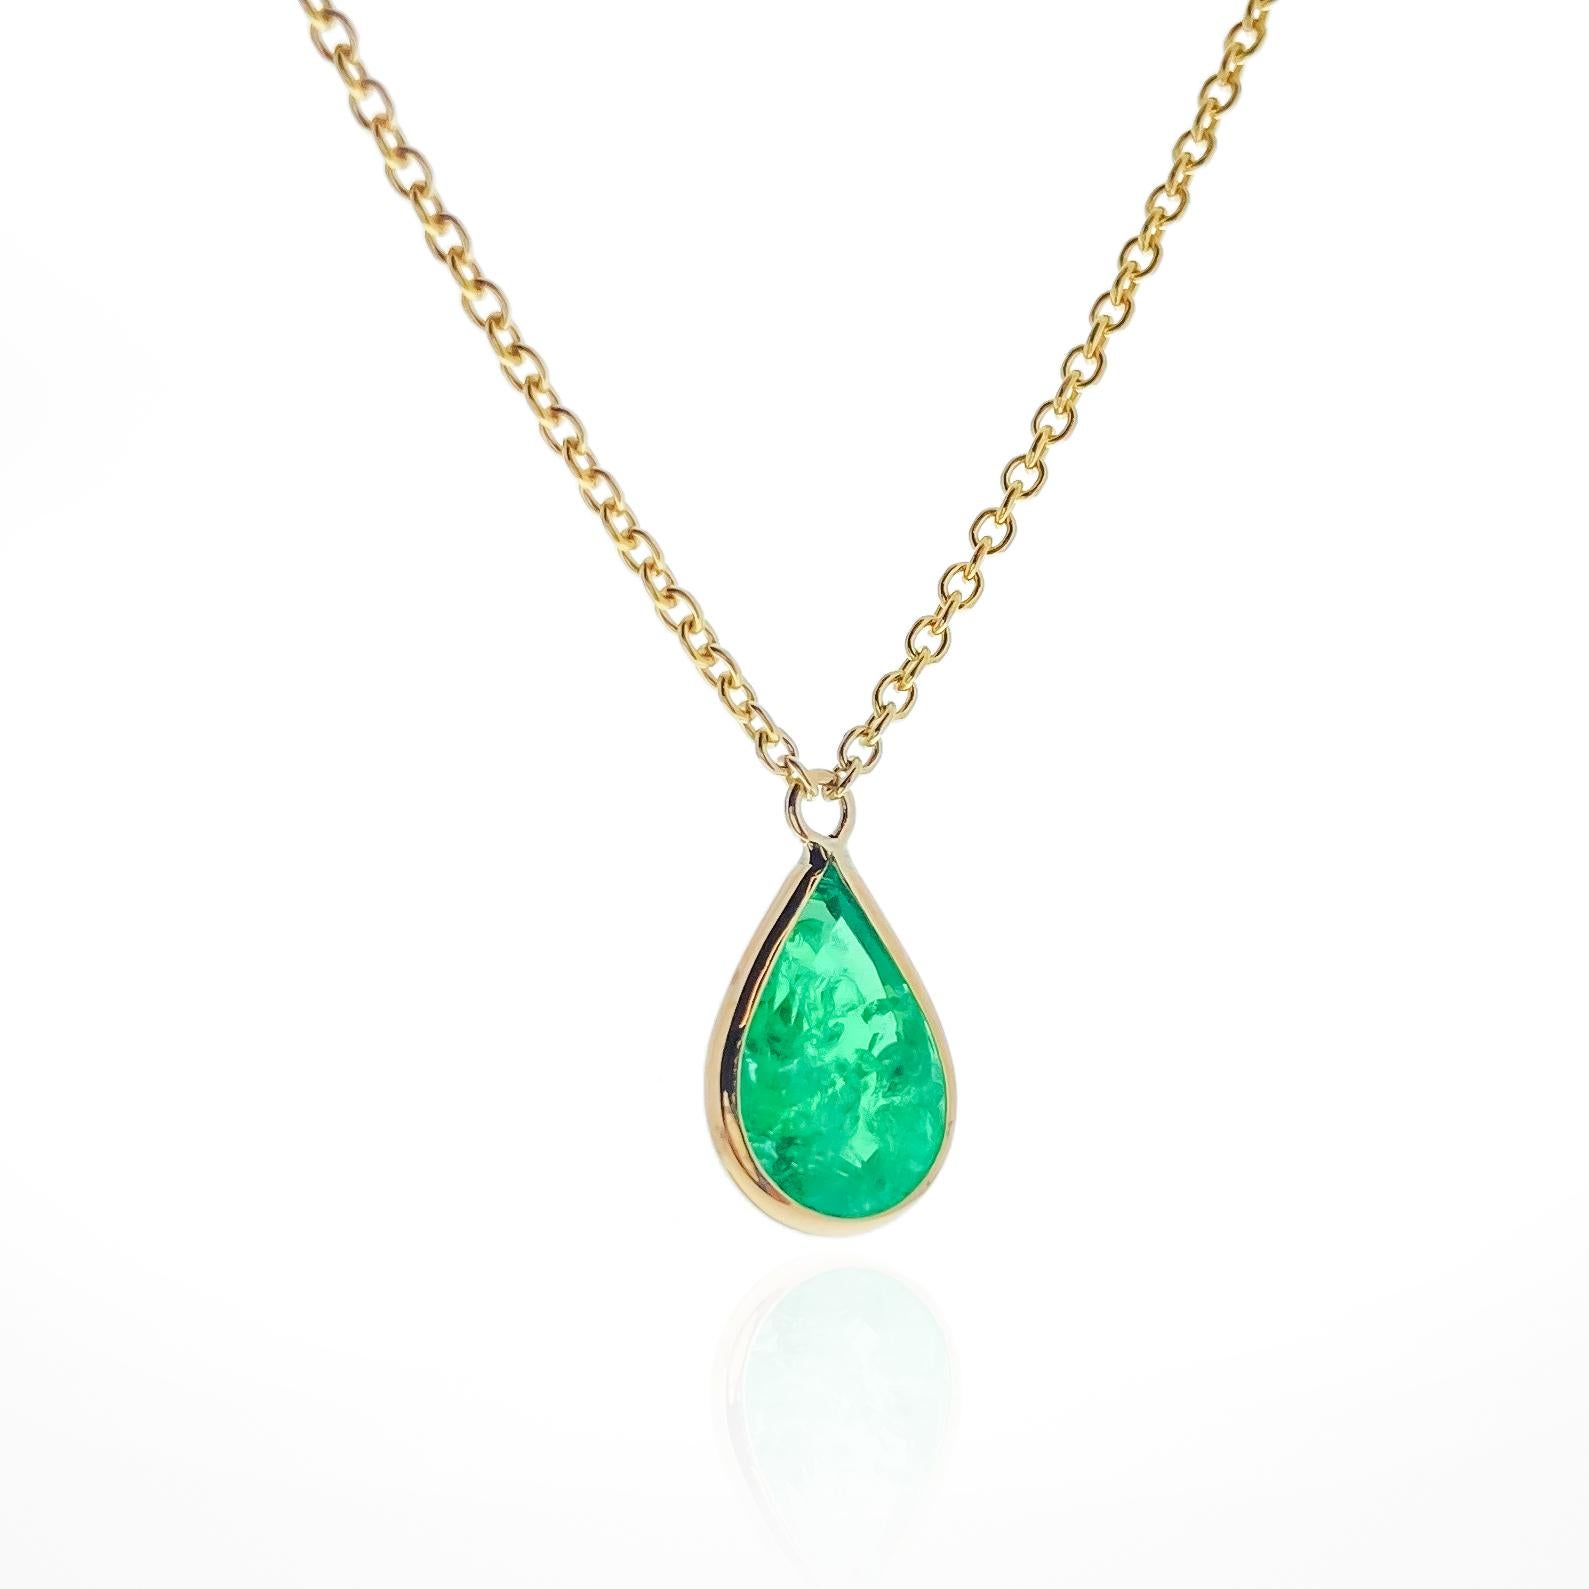 Contemporary 1.34 Carat Green Emerald Pear Shape Fashion Necklaces In 14K Yellow Gold For Sale